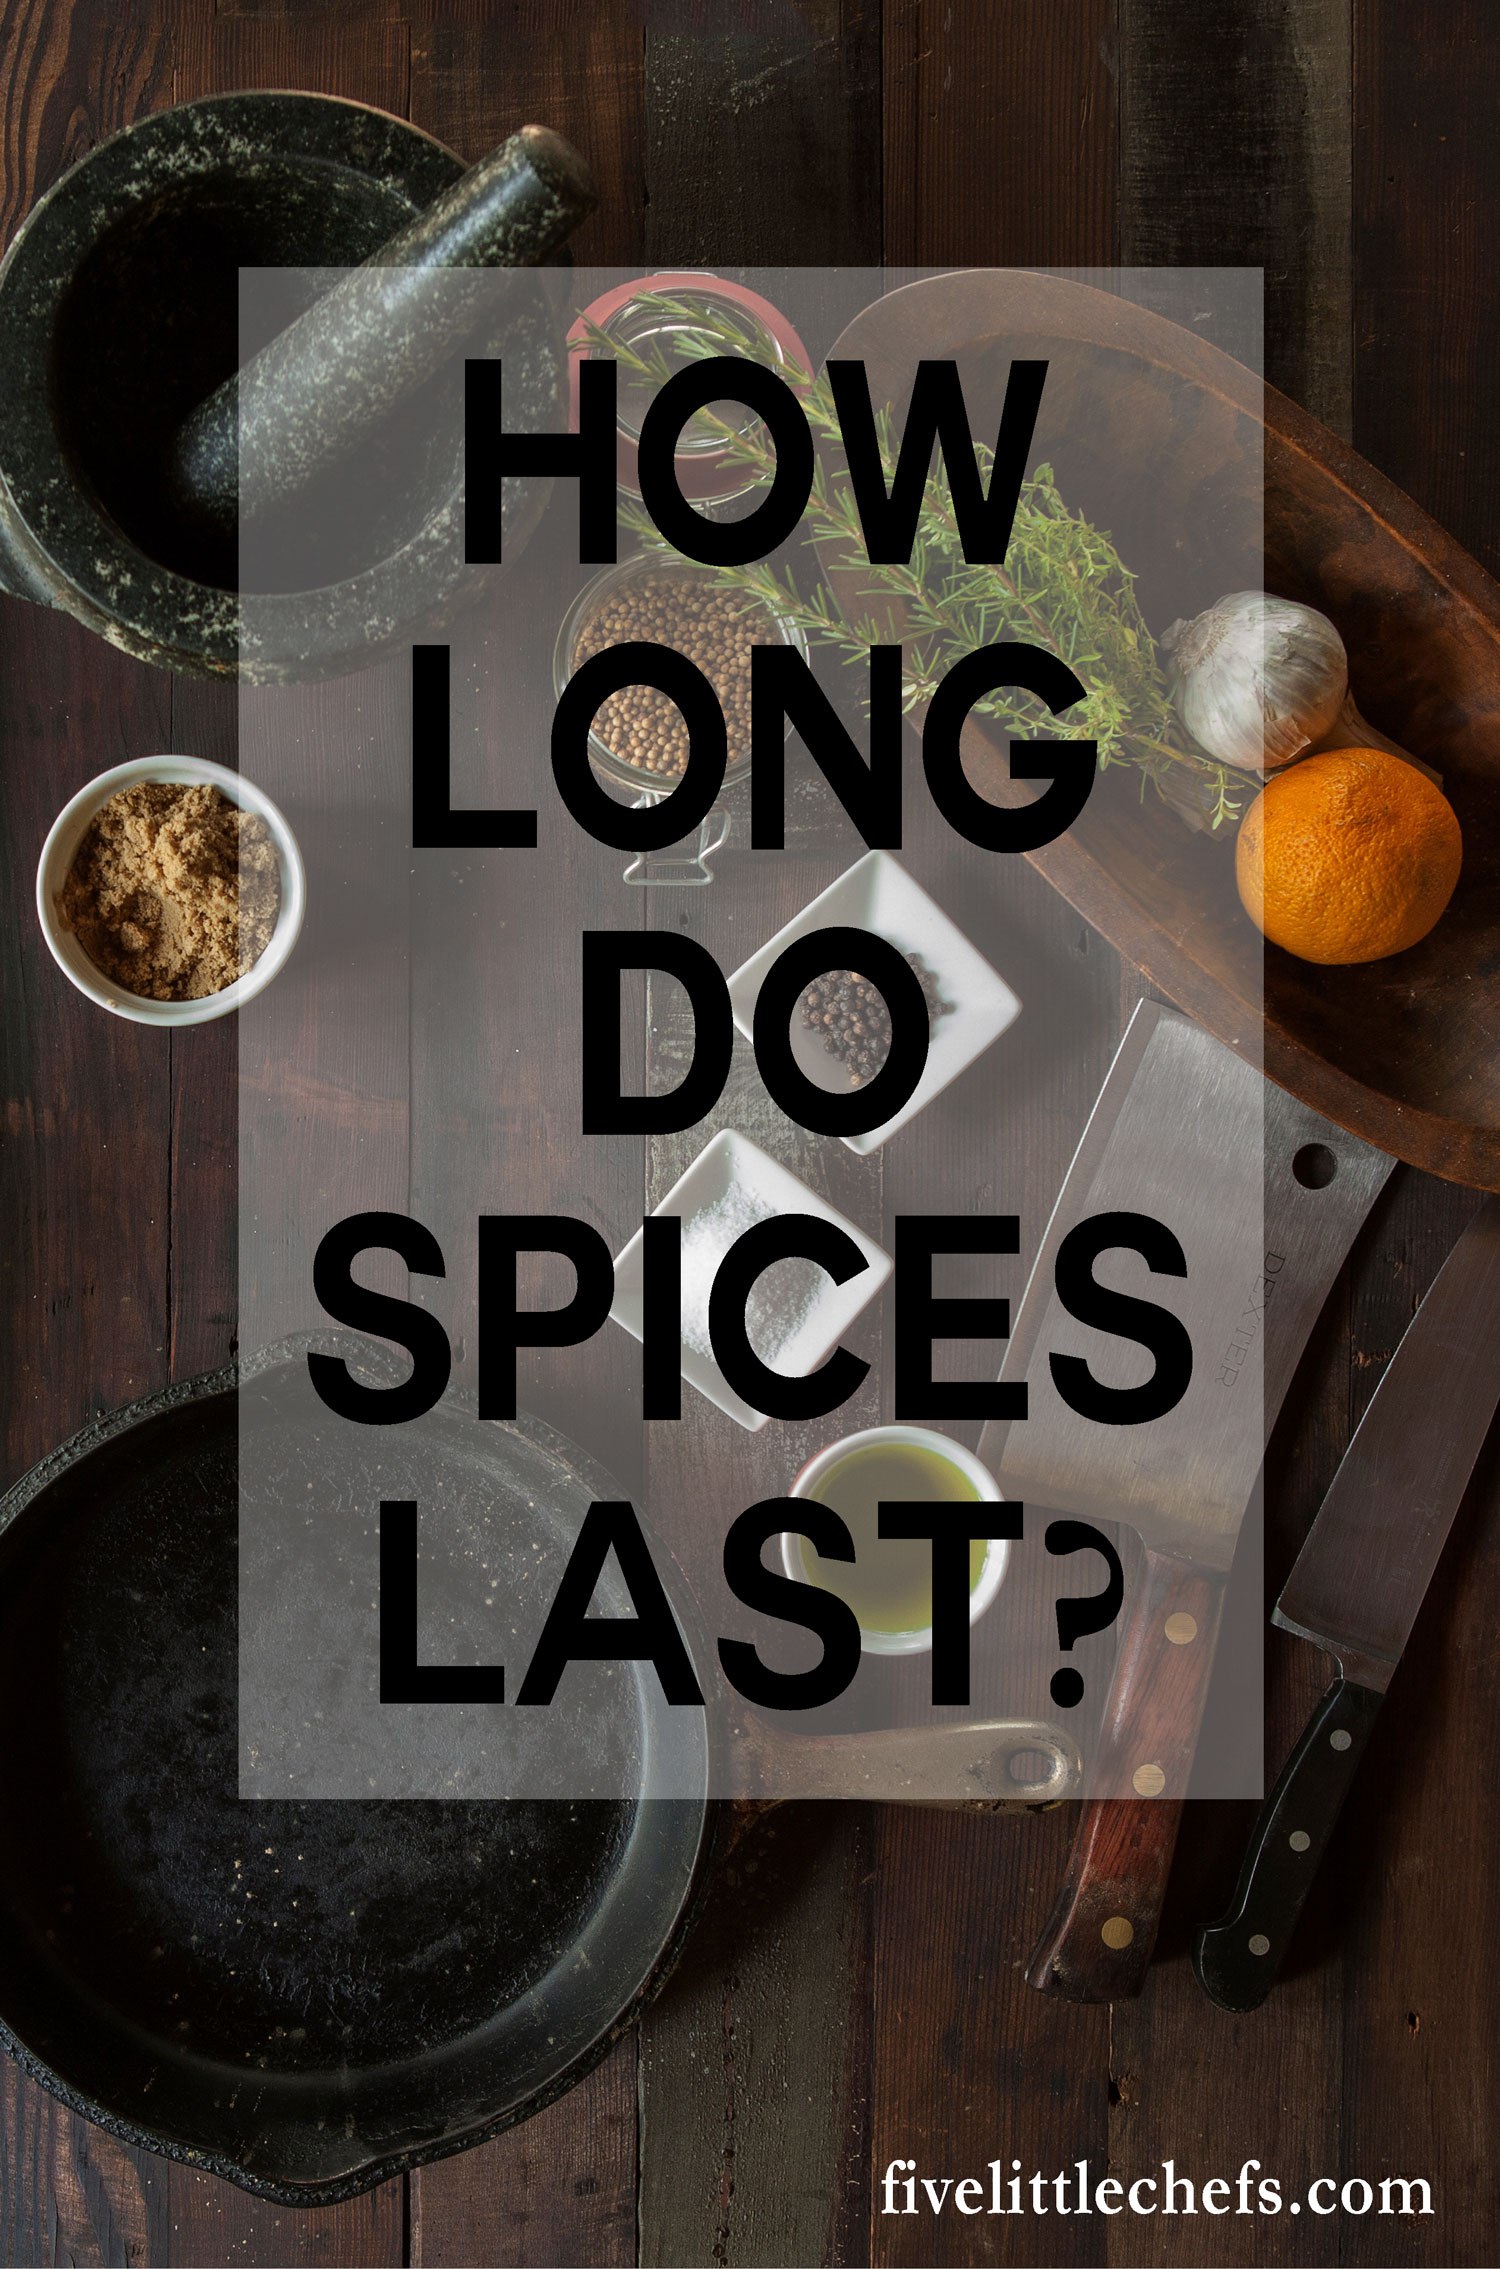 How long spices last is determined by many factors. A quick tip on what to do if you do not want to replace your spices is also included.